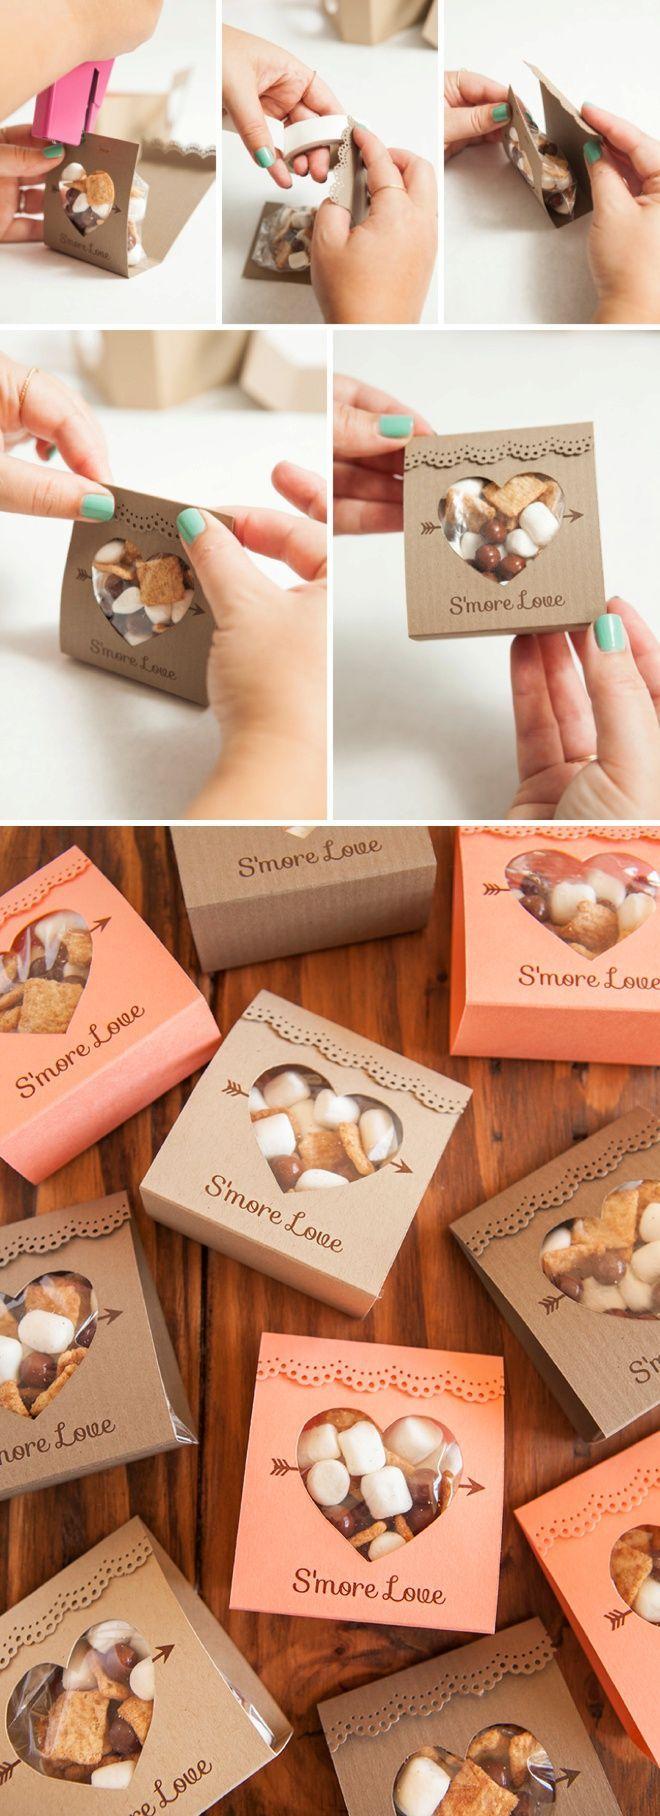 Wedding - How To Make These Adorable S'more Love Wedding Favors!